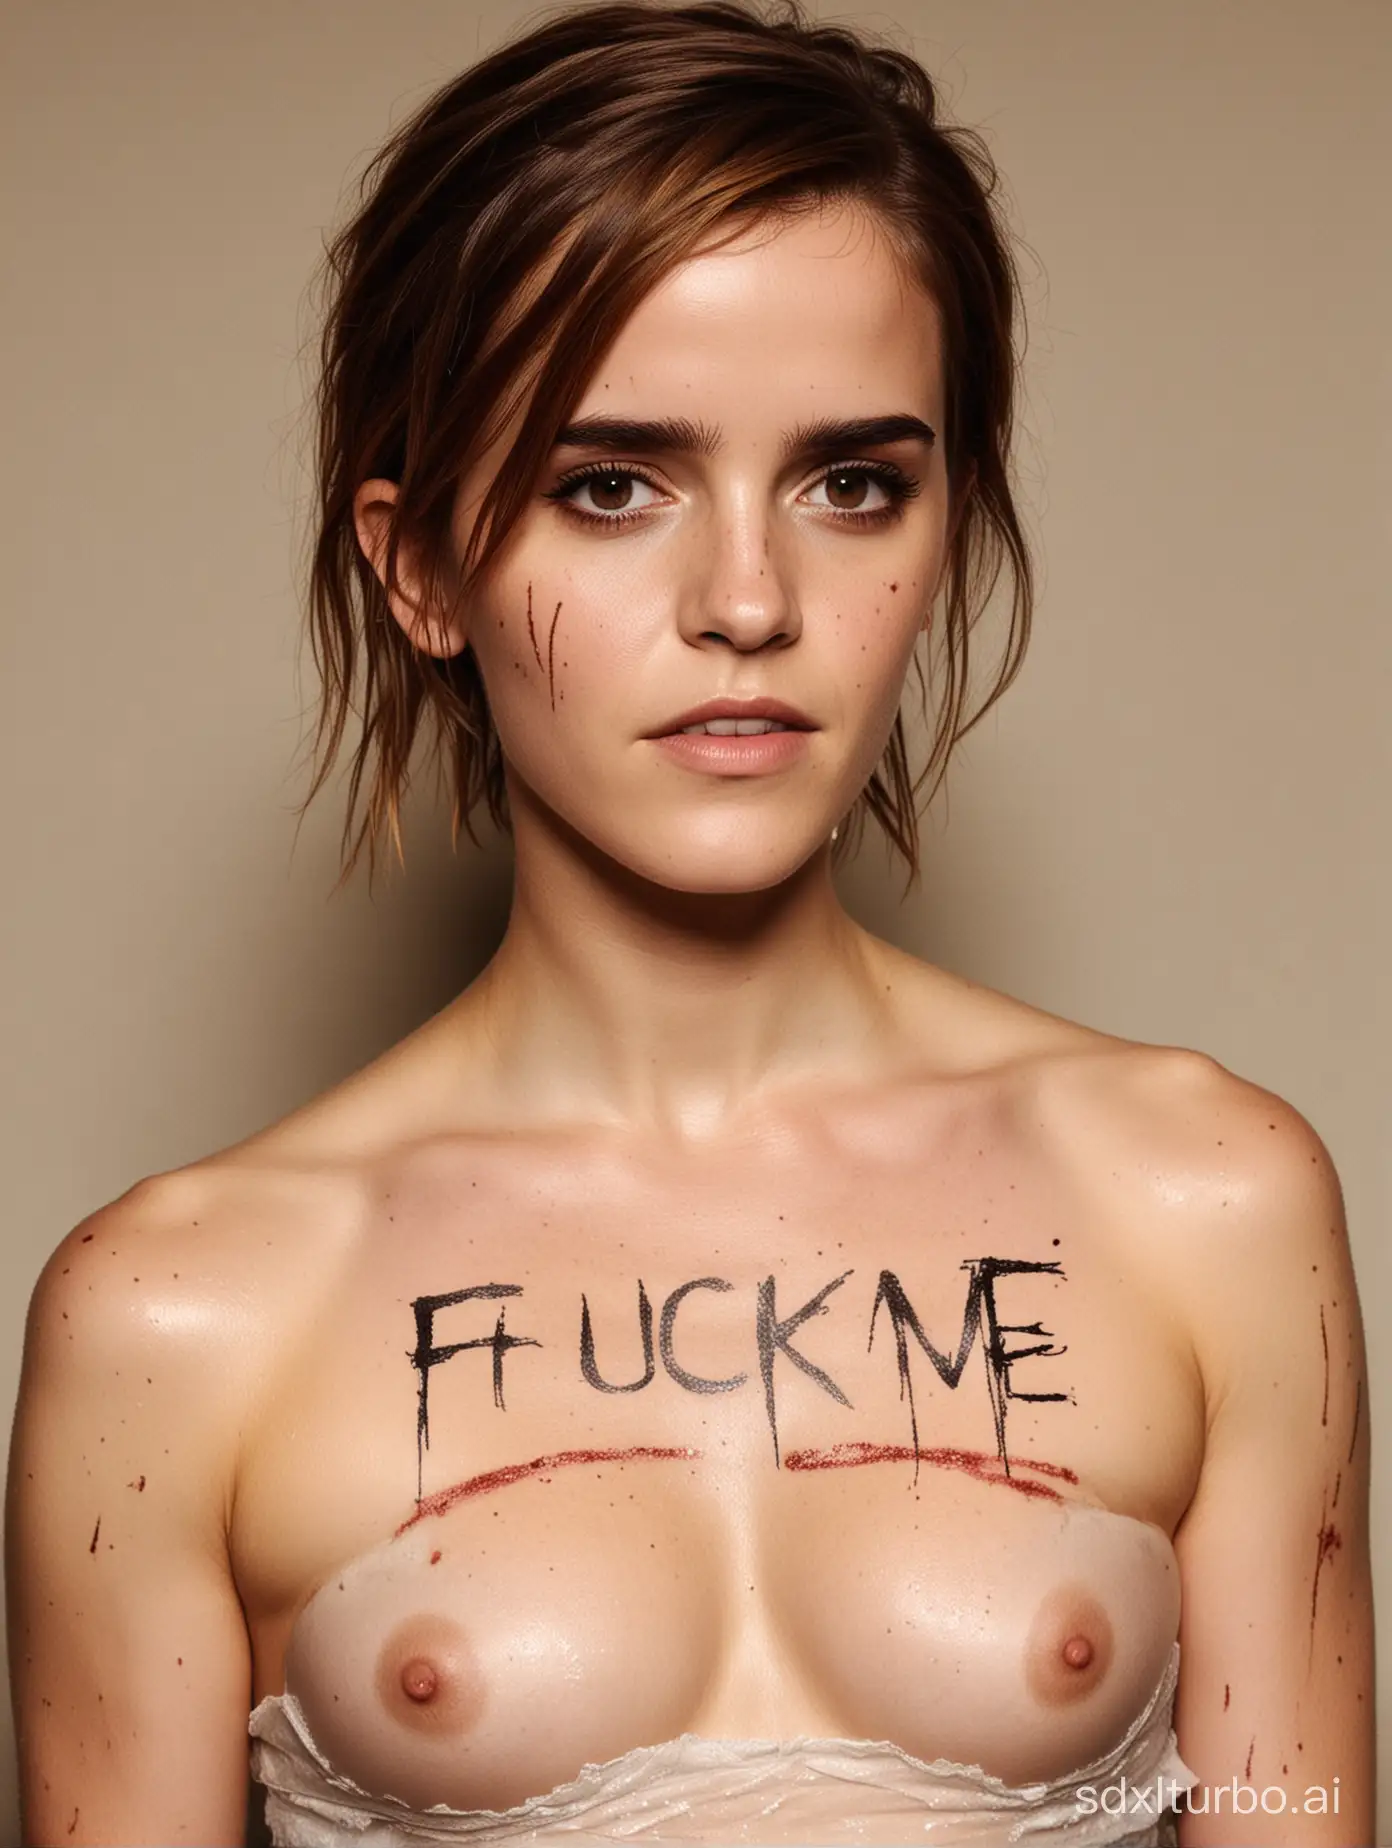 Emma Watson whose body is covered with wounds inflicted by a knife, with those scars forming the word 'Fuck me'